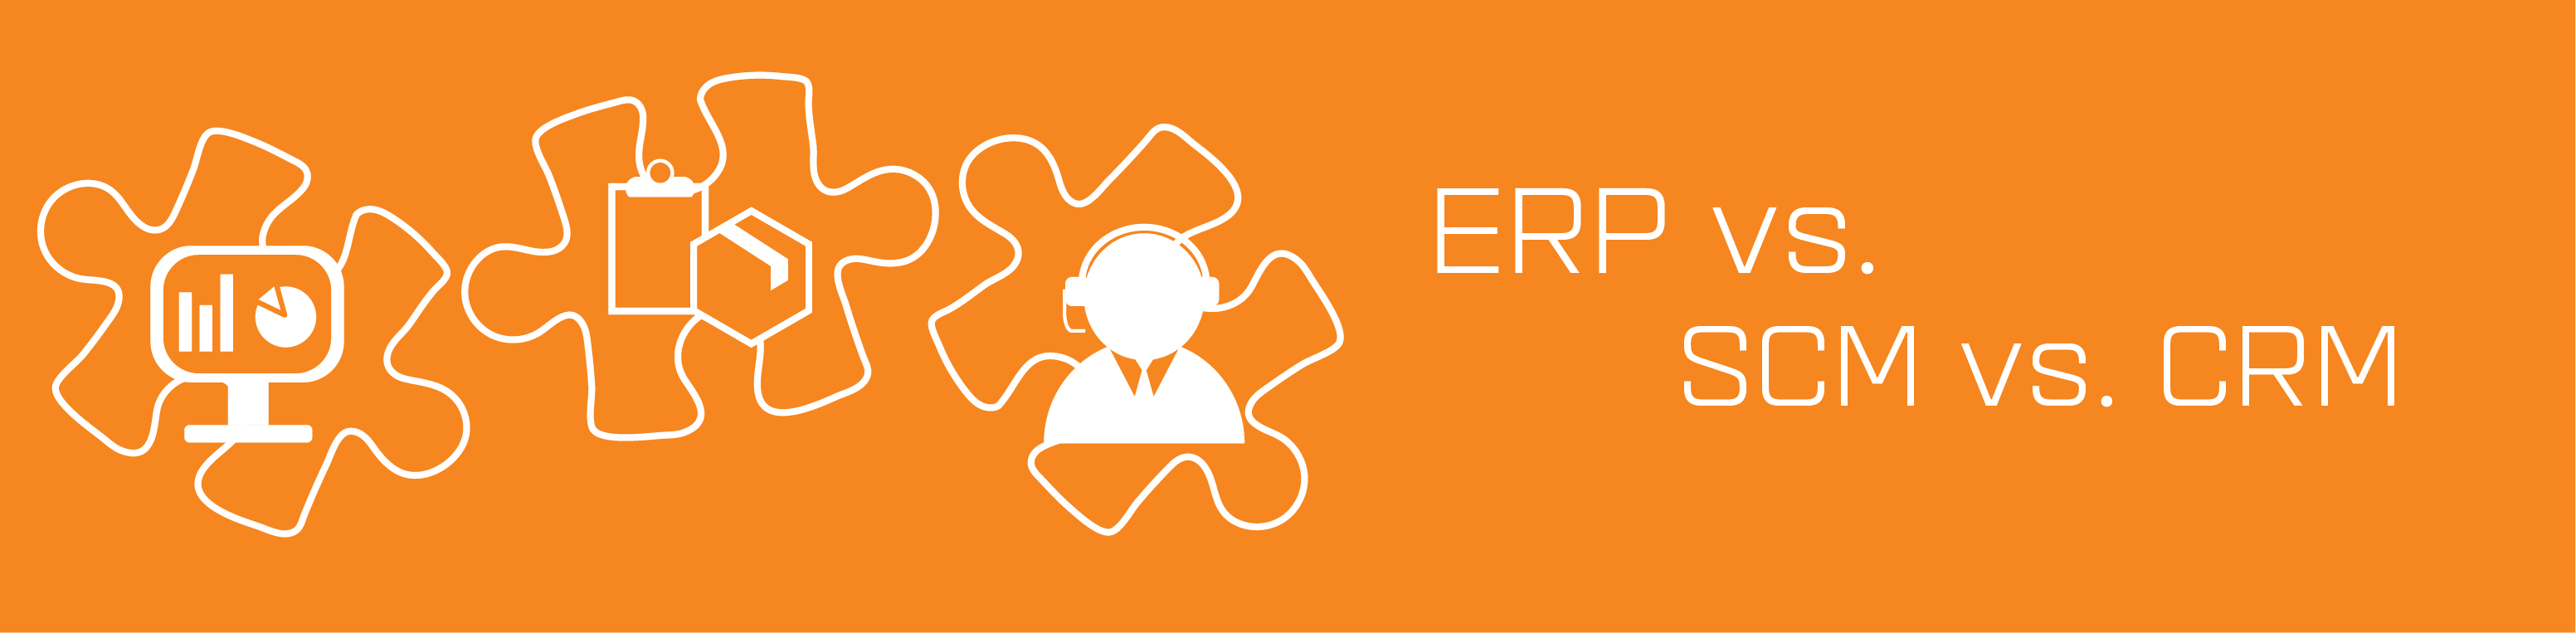 Three puzzle pieces with icons inside and copy that reads ERP vs. SCM vs. CRM